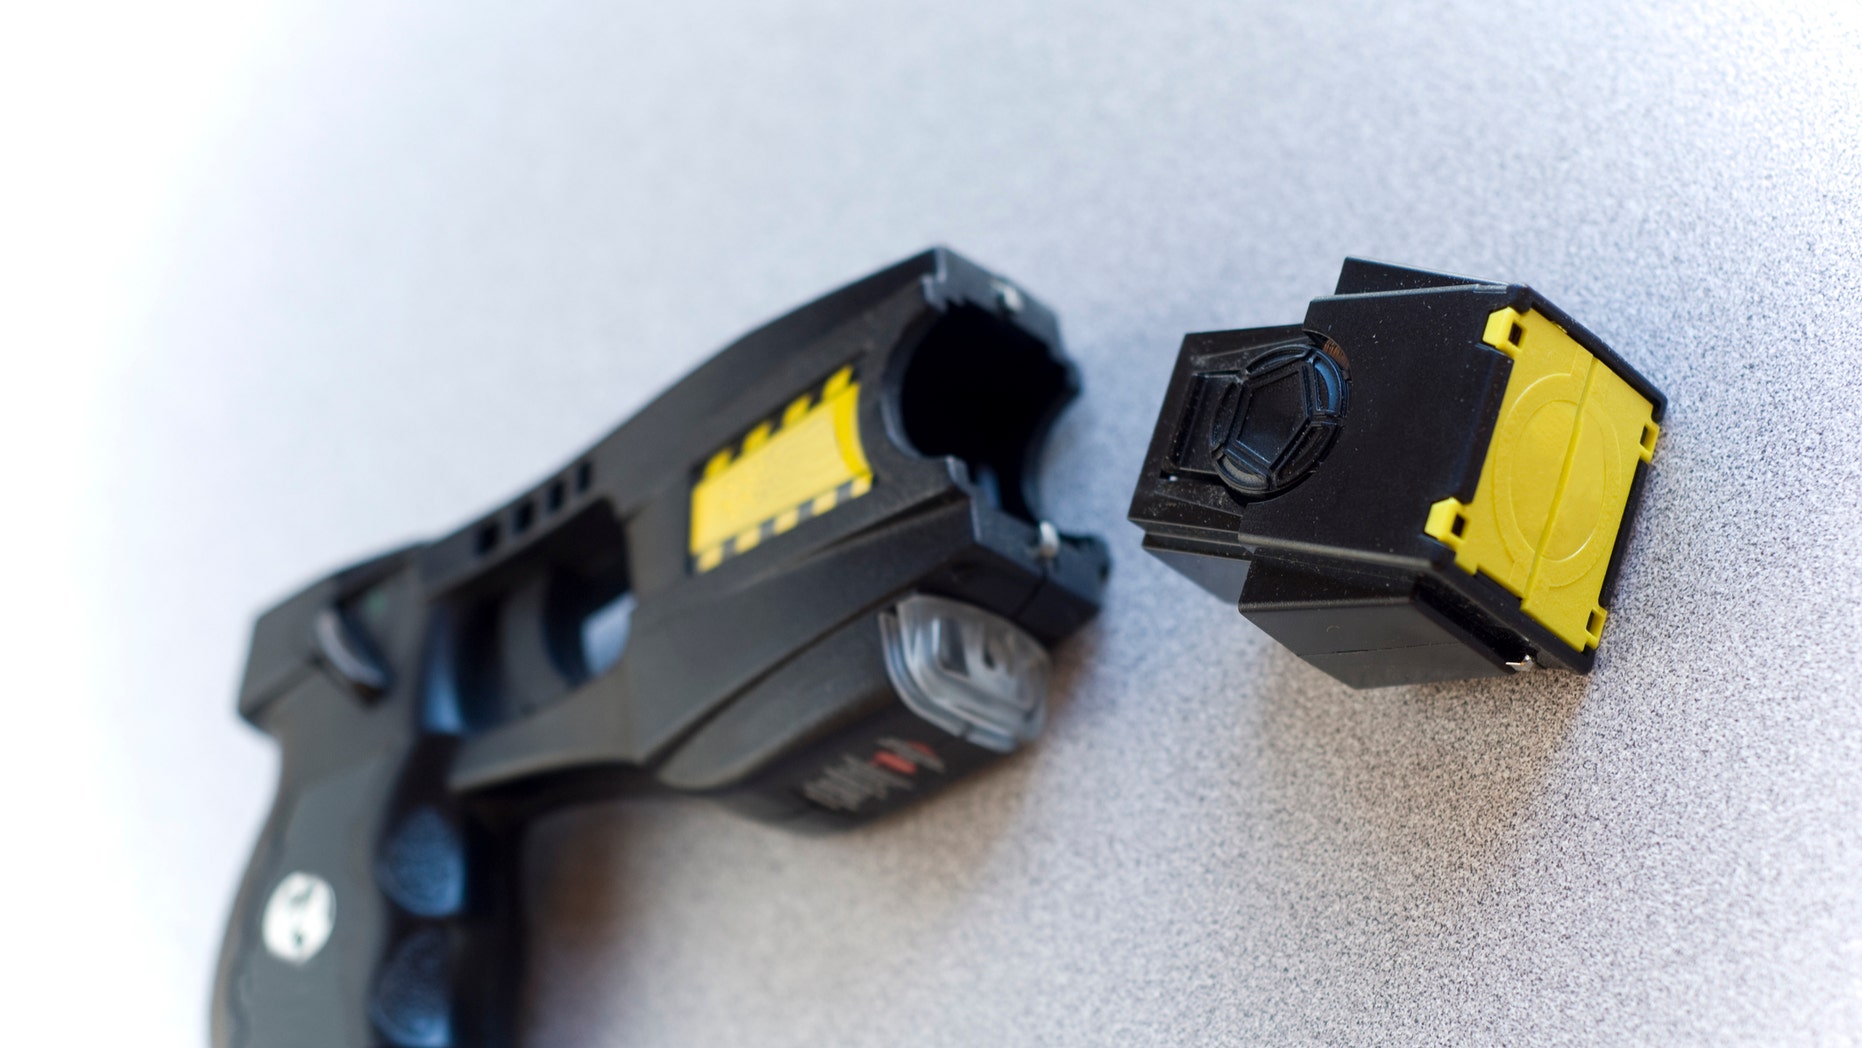 Illinois cops give public chance to get tasered for free at training event